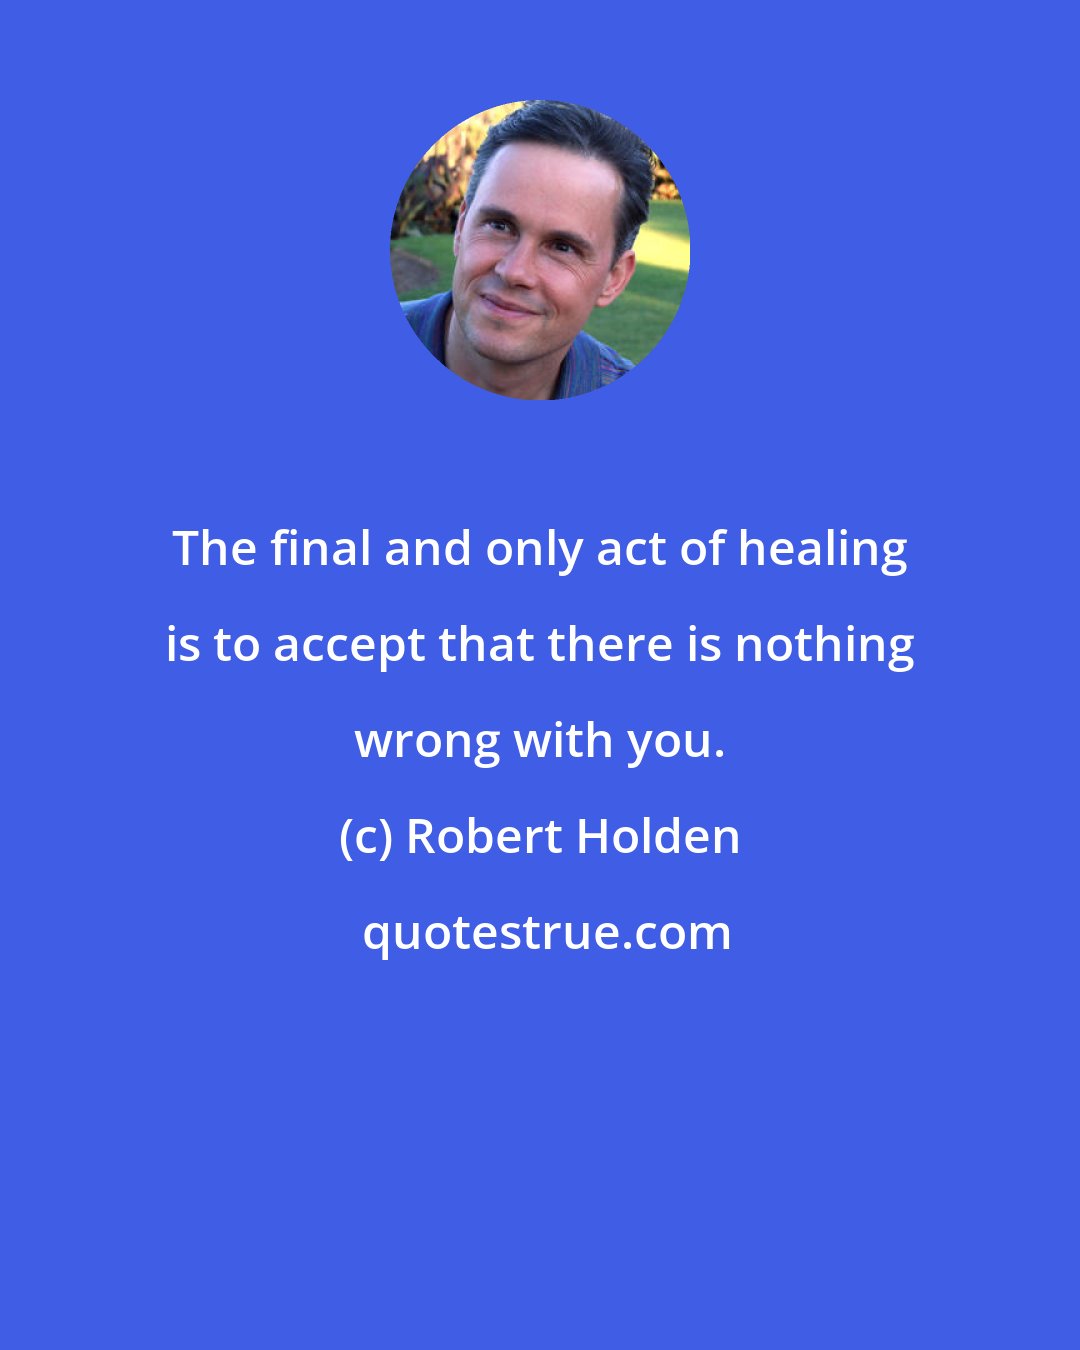 Robert Holden: The final and only act of healing is to accept that there is nothing wrong with you.